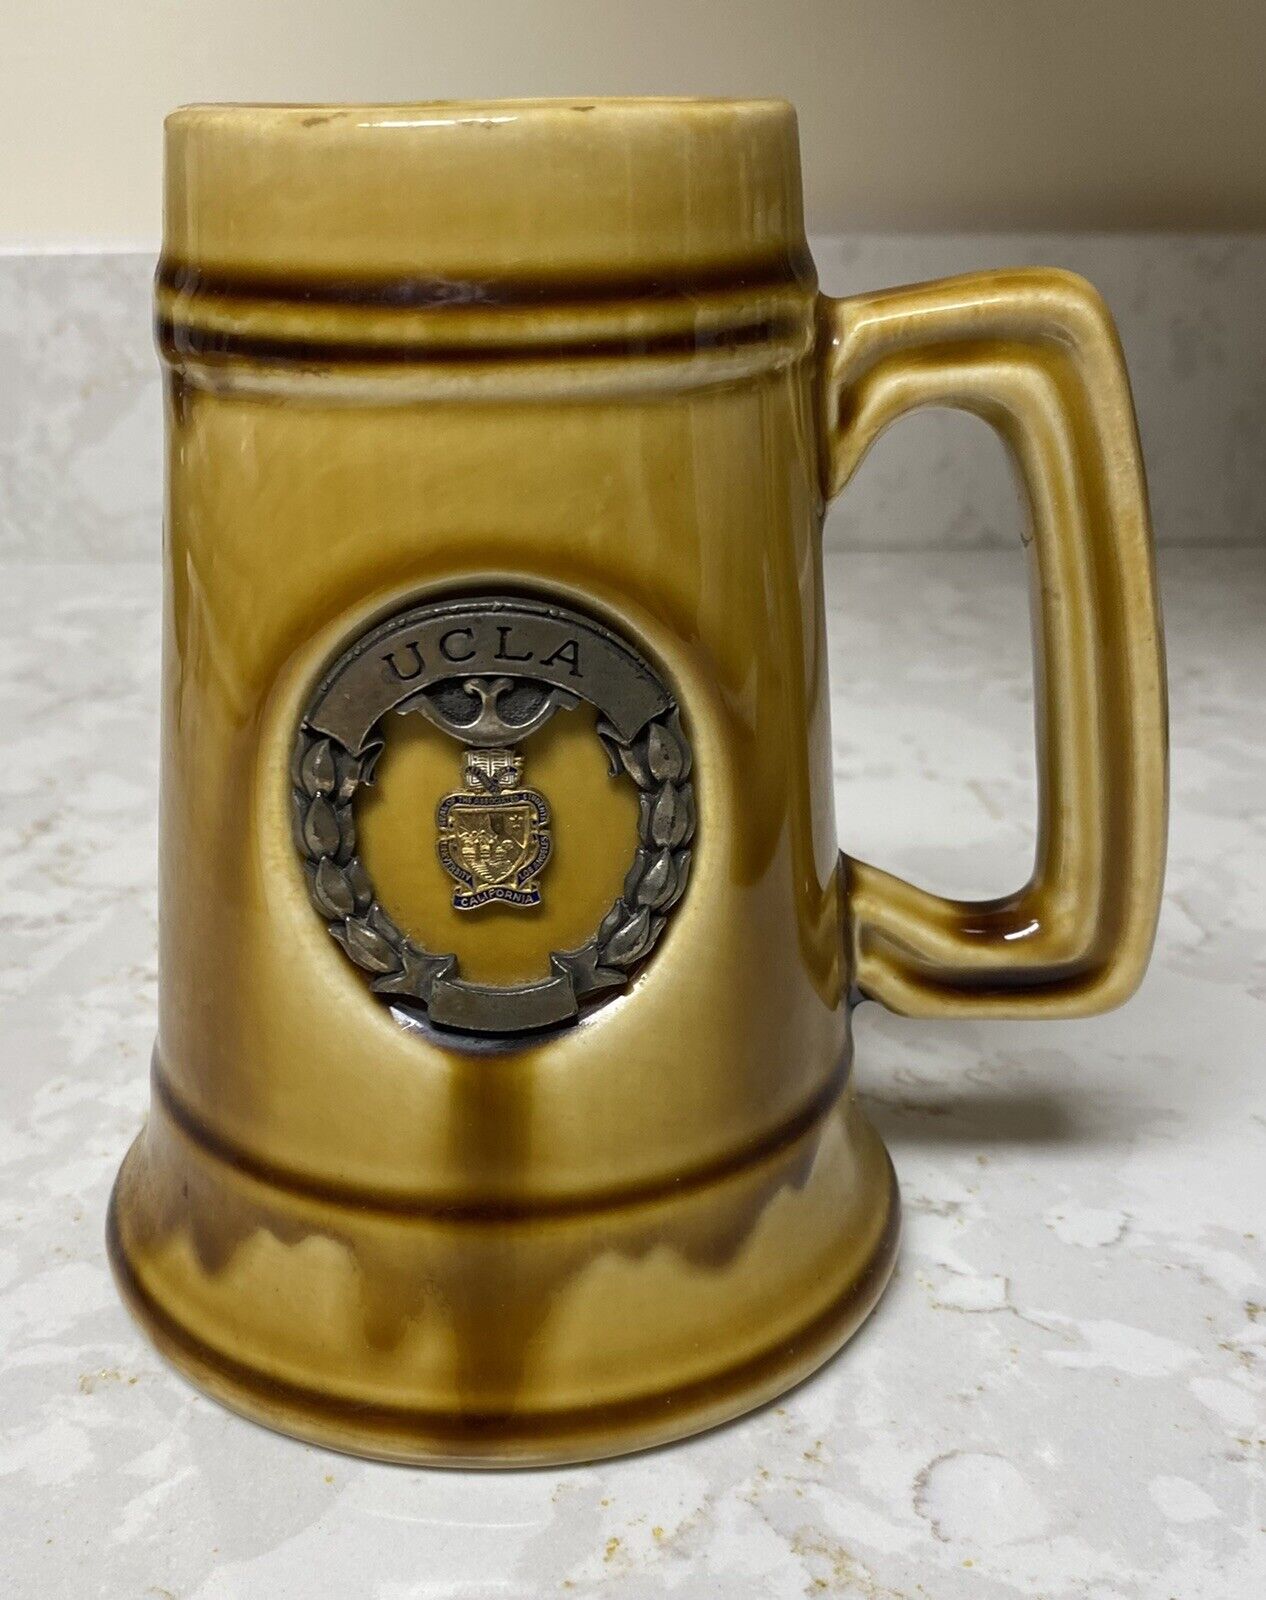 Early UCLA university beer stein with metal emblem in excellent condition